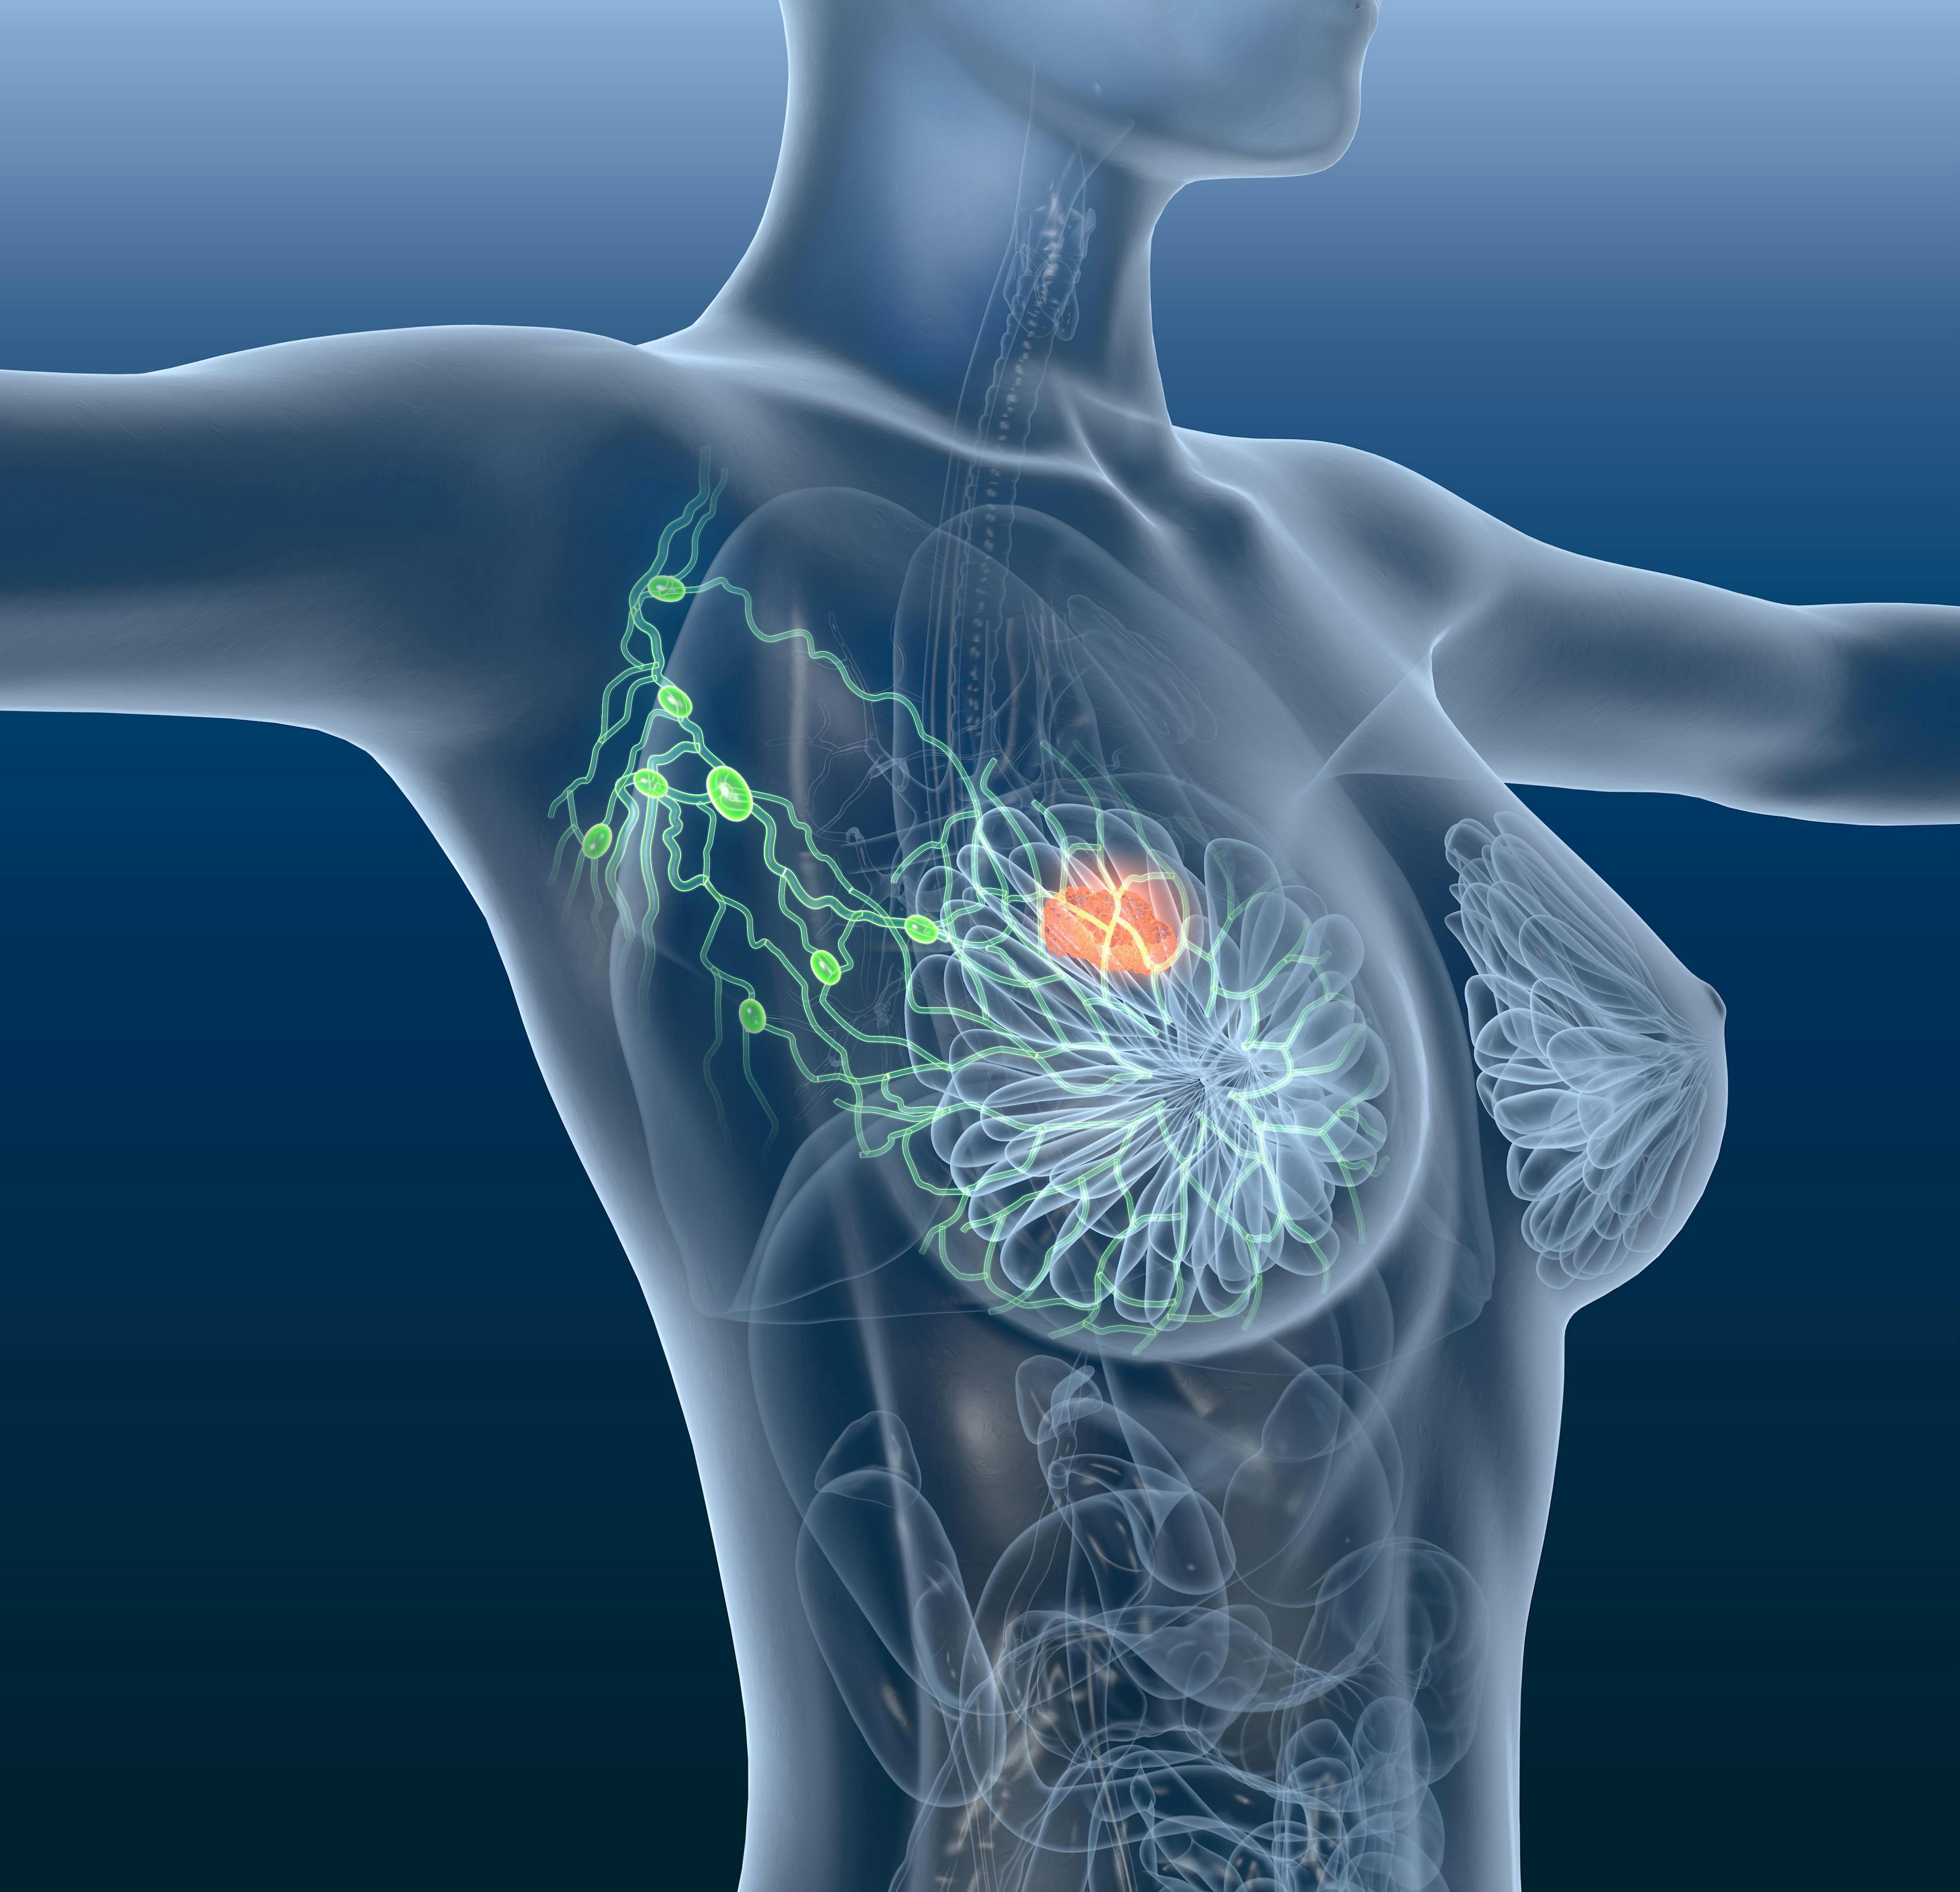 Study Shows Need for Evidence-Based, Educational Material for Providers and Patients with Metastatic Breast Cancer